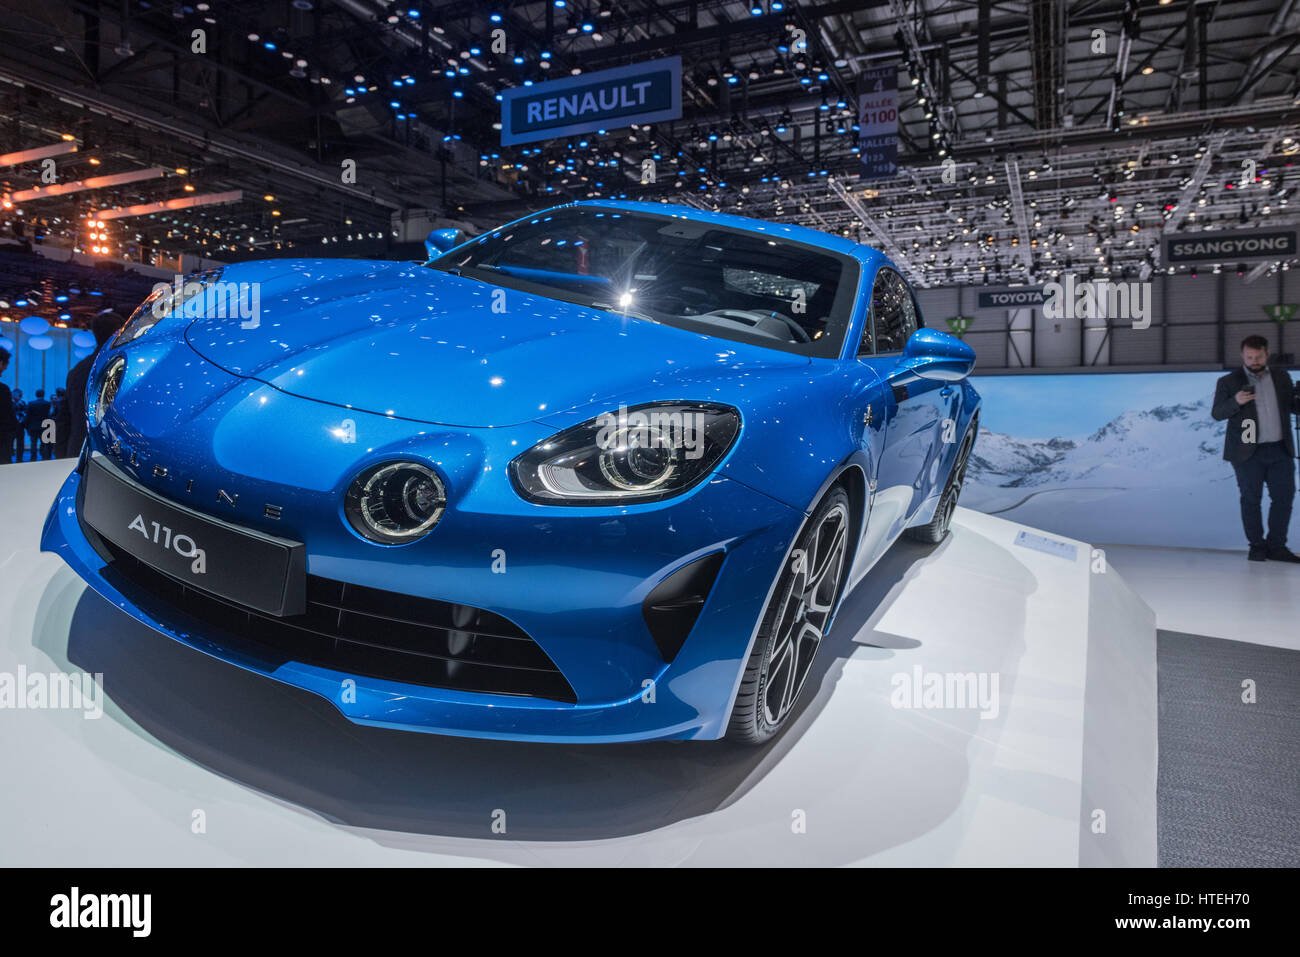 Switzerland Automotive Renault High Resolution Stock Photography and Images  - Alamy